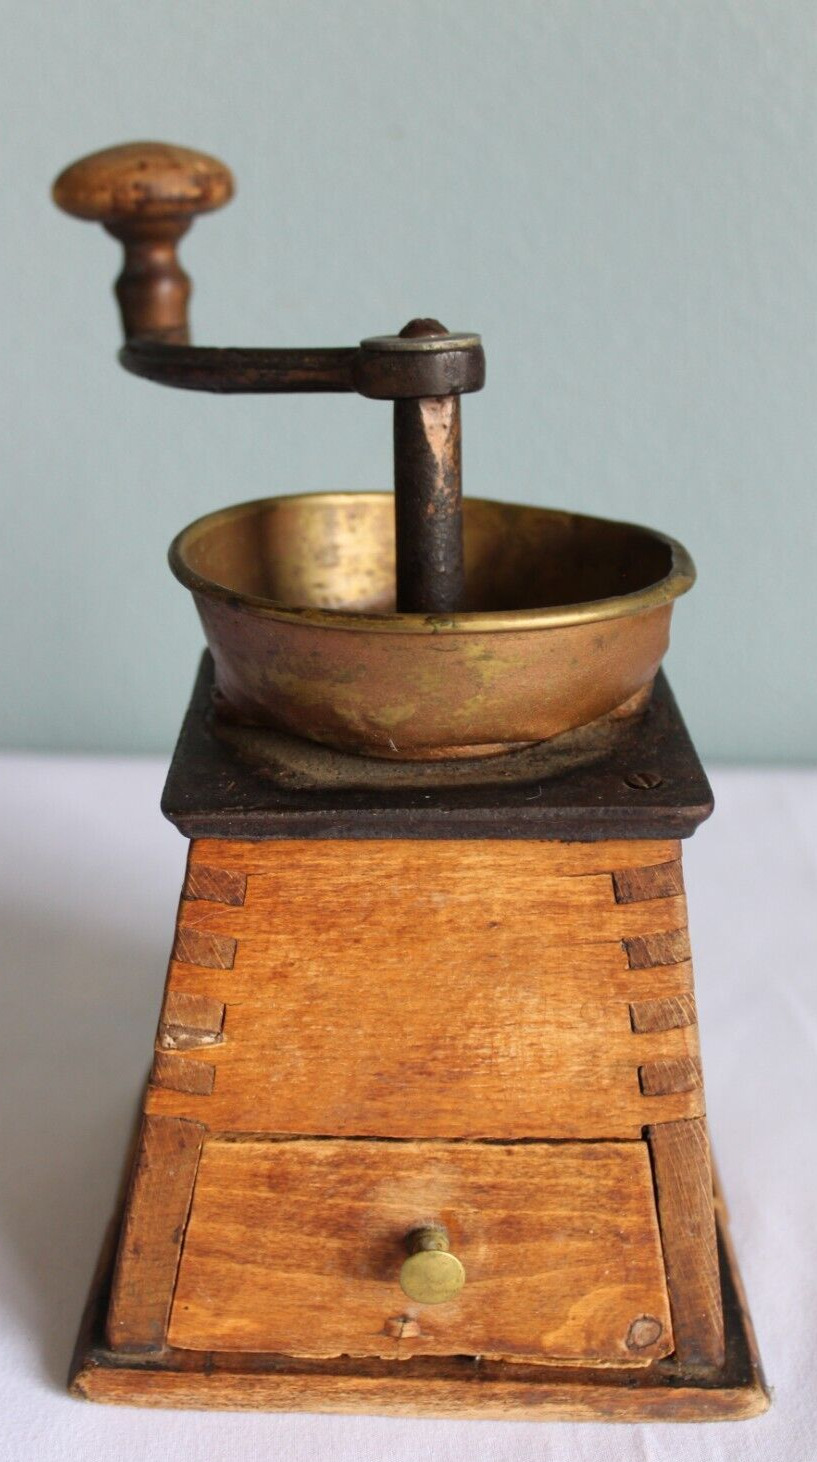 Antique Vintage Wooden Garant.F.O. Pyramid Bronze Table Box Coffee Mill Grinder